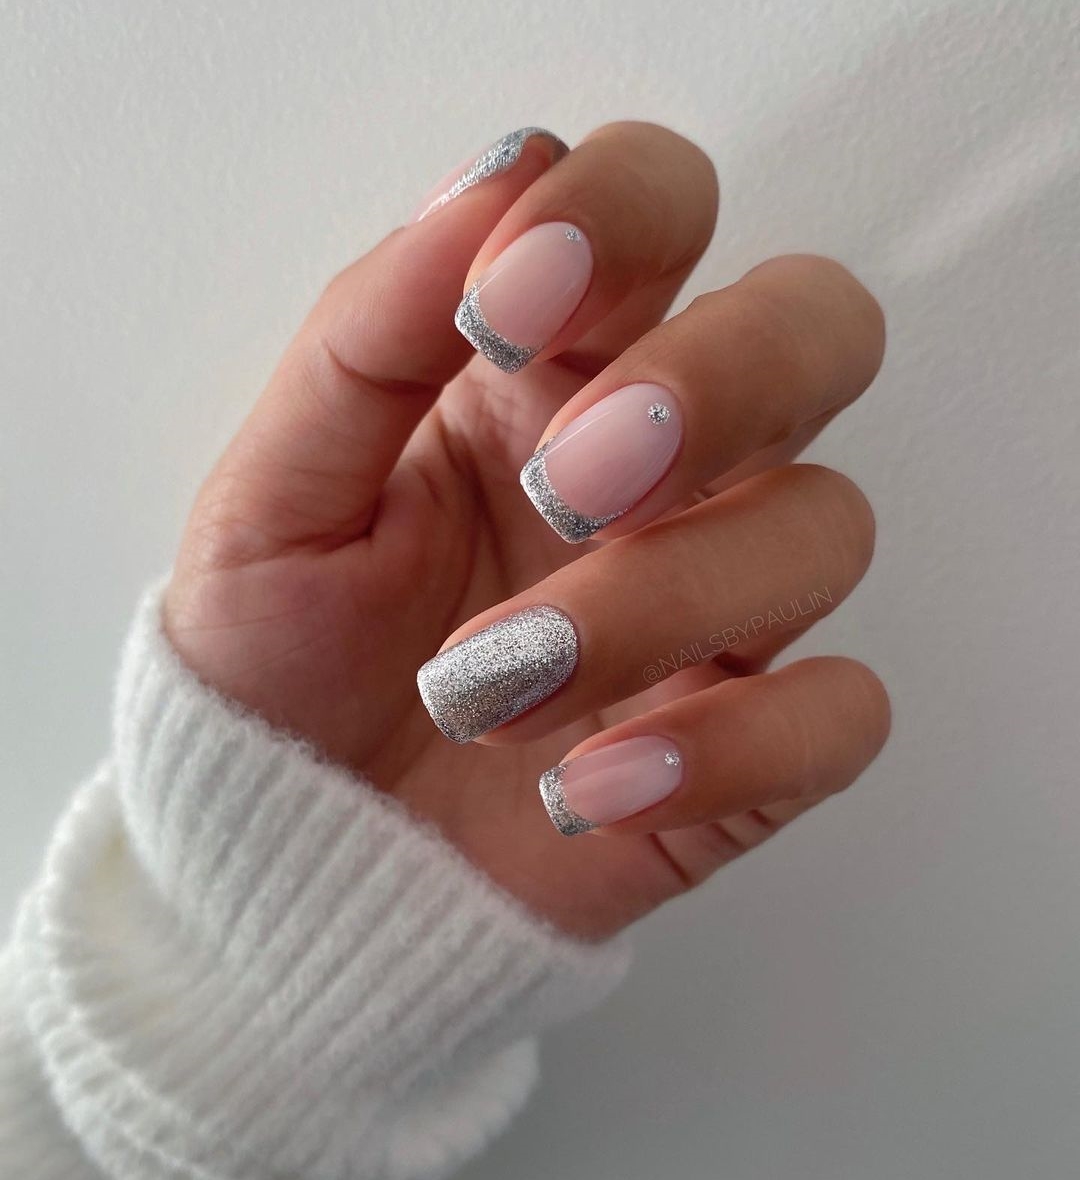 Short Nails with Silver Glitter Tips